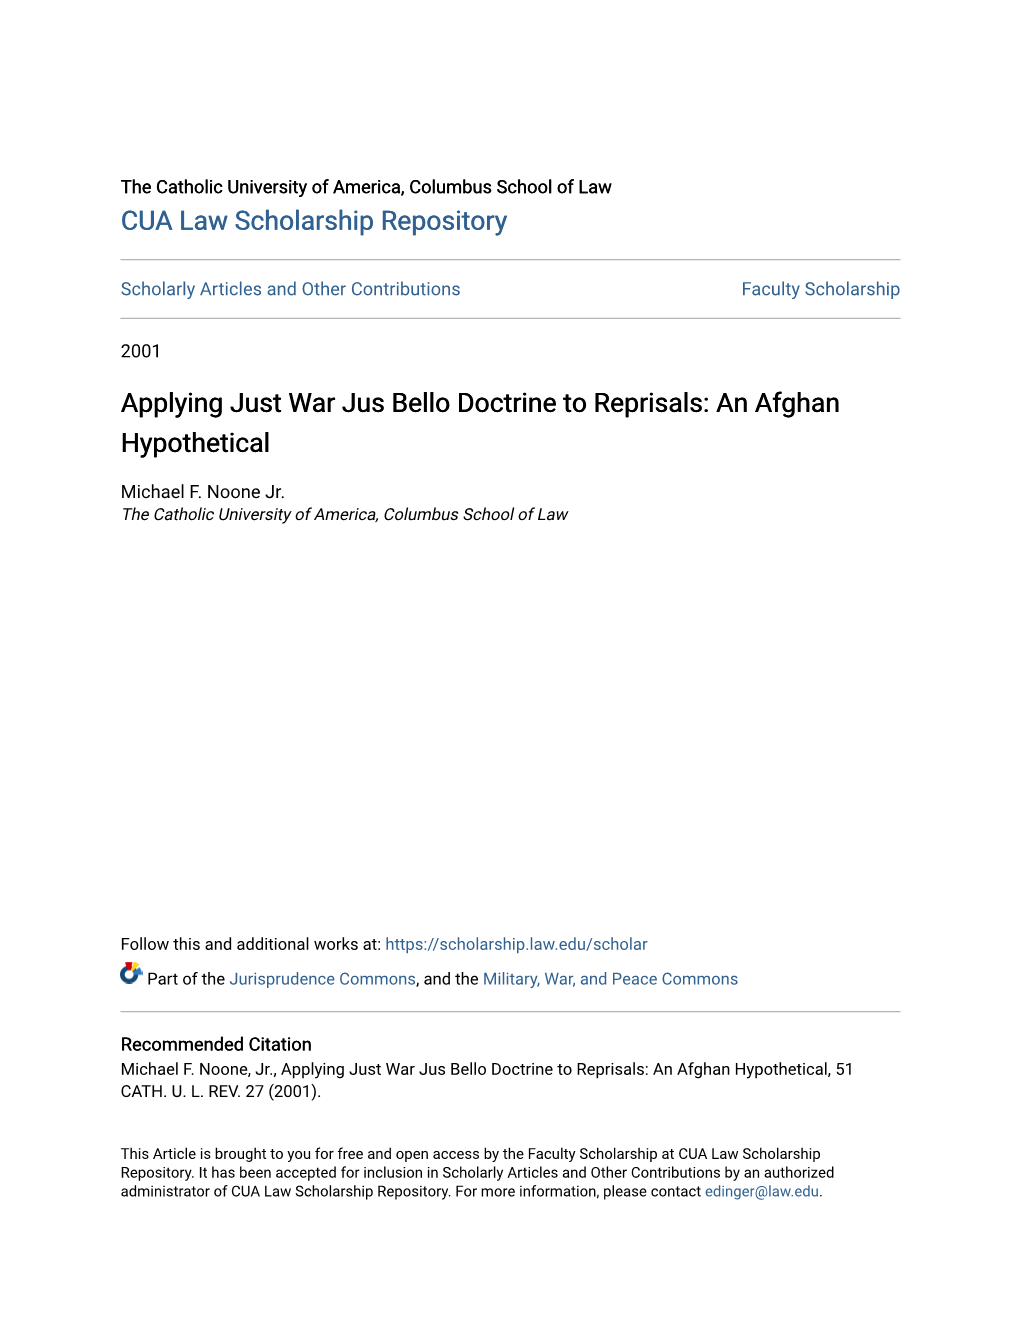 Applying Just War Jus Bello Doctrine to Reprisals: an Afghan Hypothetical